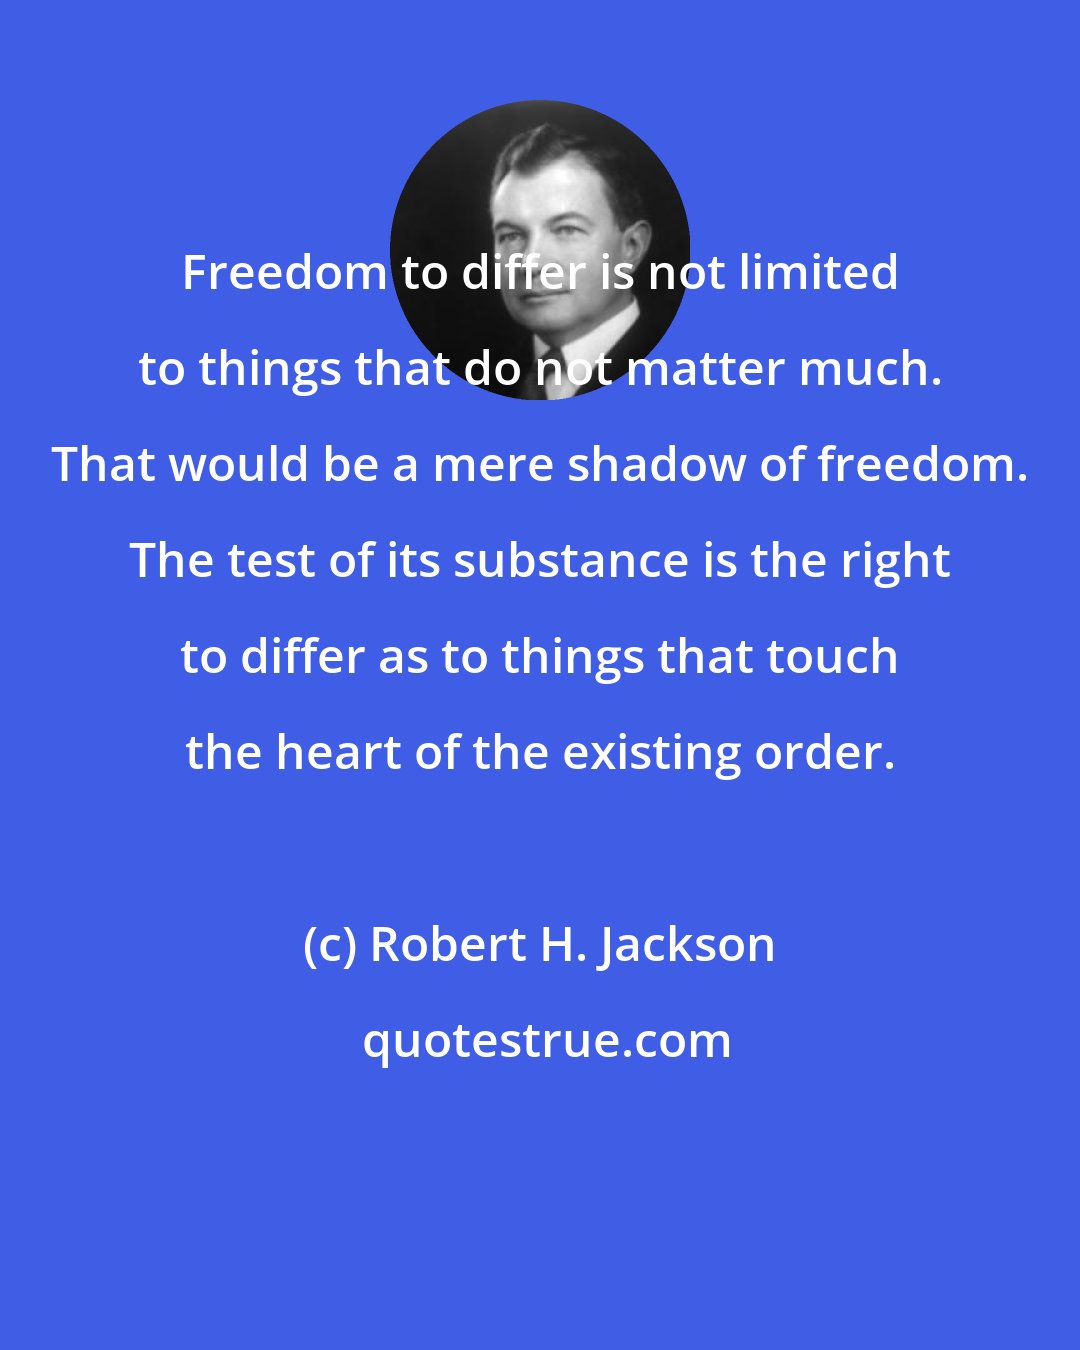 Robert H. Jackson: Freedom to differ is not limited to things that do not matter much. That would be a mere shadow of freedom. The test of its substance is the right to differ as to things that touch the heart of the existing order.